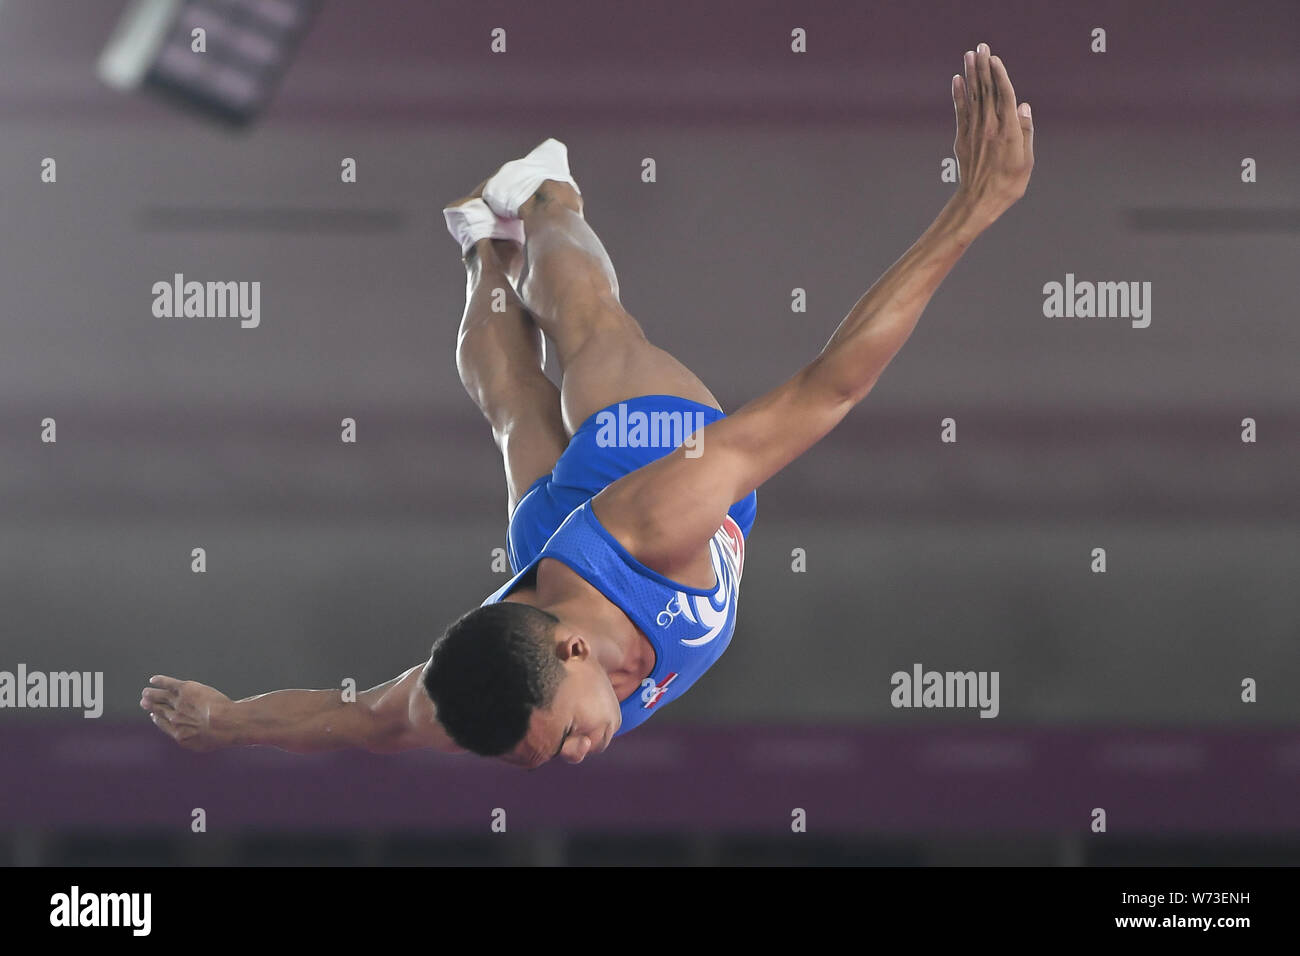 Lima, Peru. 4th Aug, 2019. JUNIOR MATEO from the Dominican Republic flips upside down during the competition held in the Polideportivo Villa El Salvador in Lima, Peru. Credit: Amy Sanderson/ZUMA Wire/Alamy Live News Stock Photo